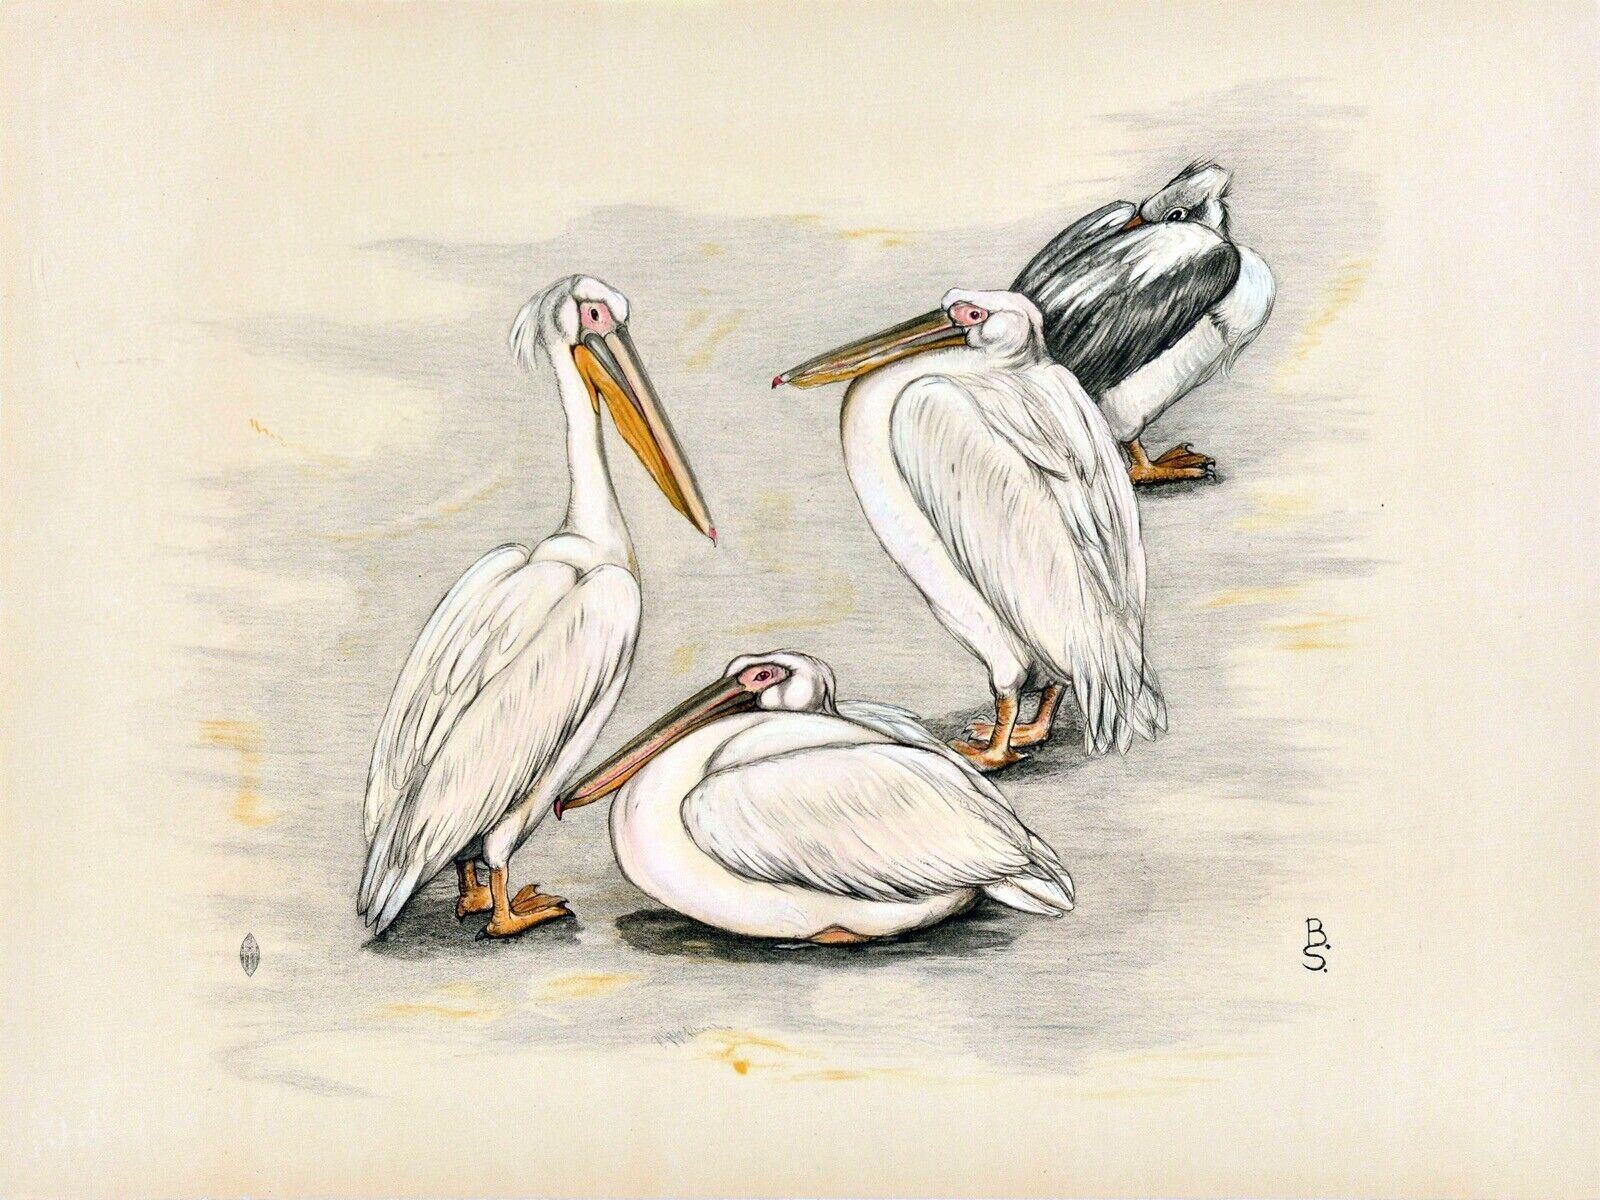 12923.Decoration Poster.Wall art.Home vintage interior design.Group of pelicans - $17.10 - $54.00